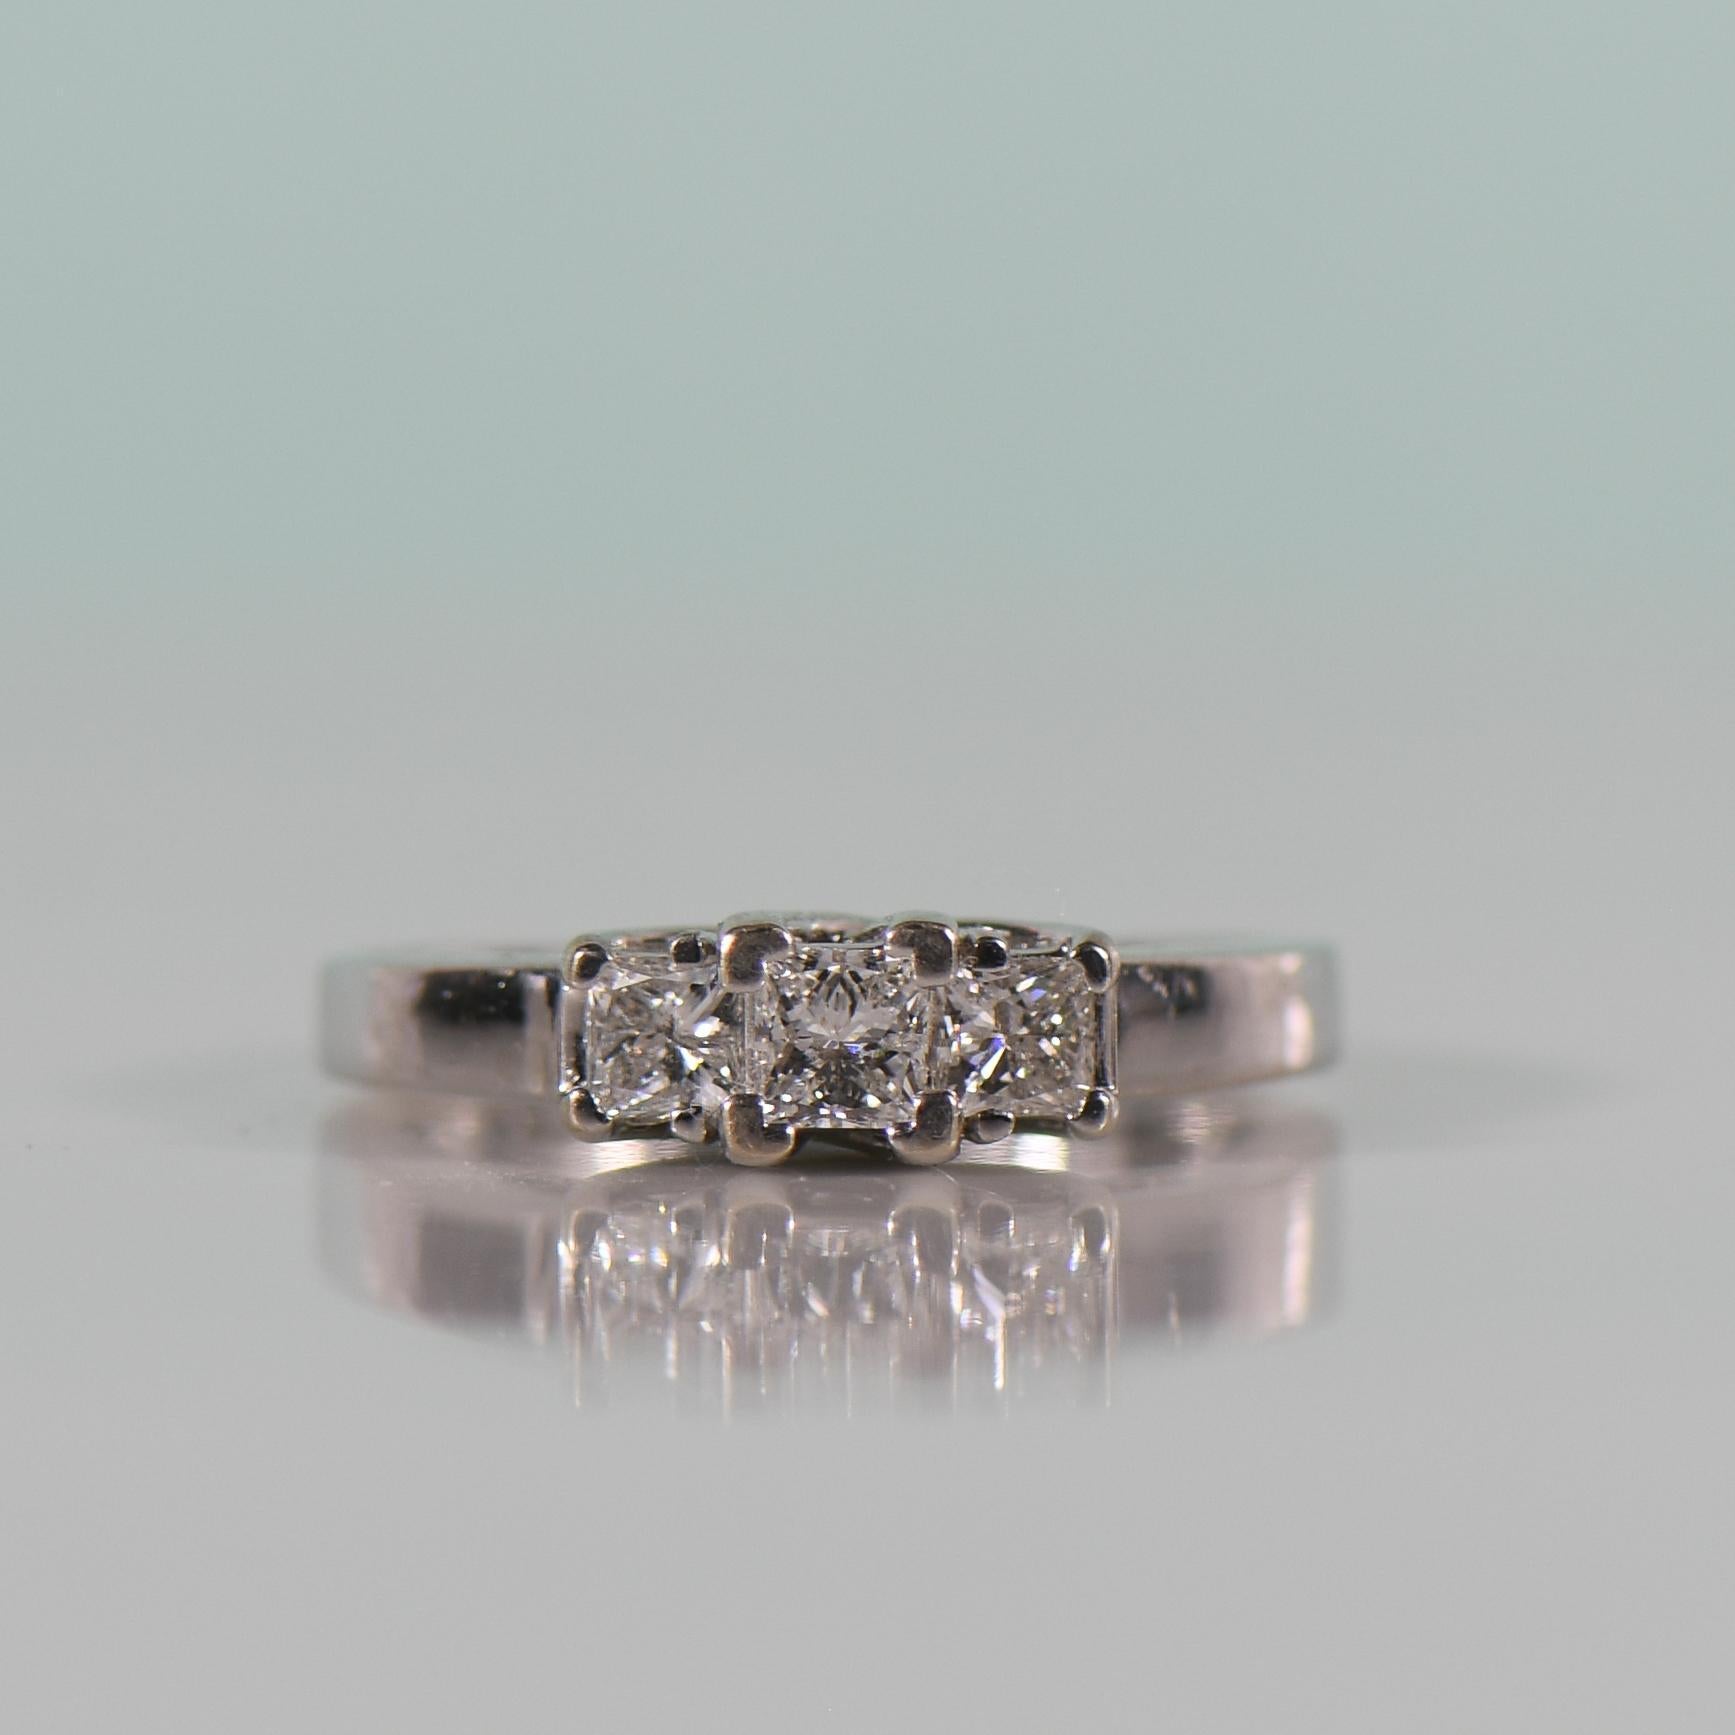 Elevate your love story with this modern masterpiece—a 1.00 carat, three-stone princess cut ring in a captivating trellis style setting. Designed to symbolize the past, present, and future of your relationship, each stone glistens with brilliance